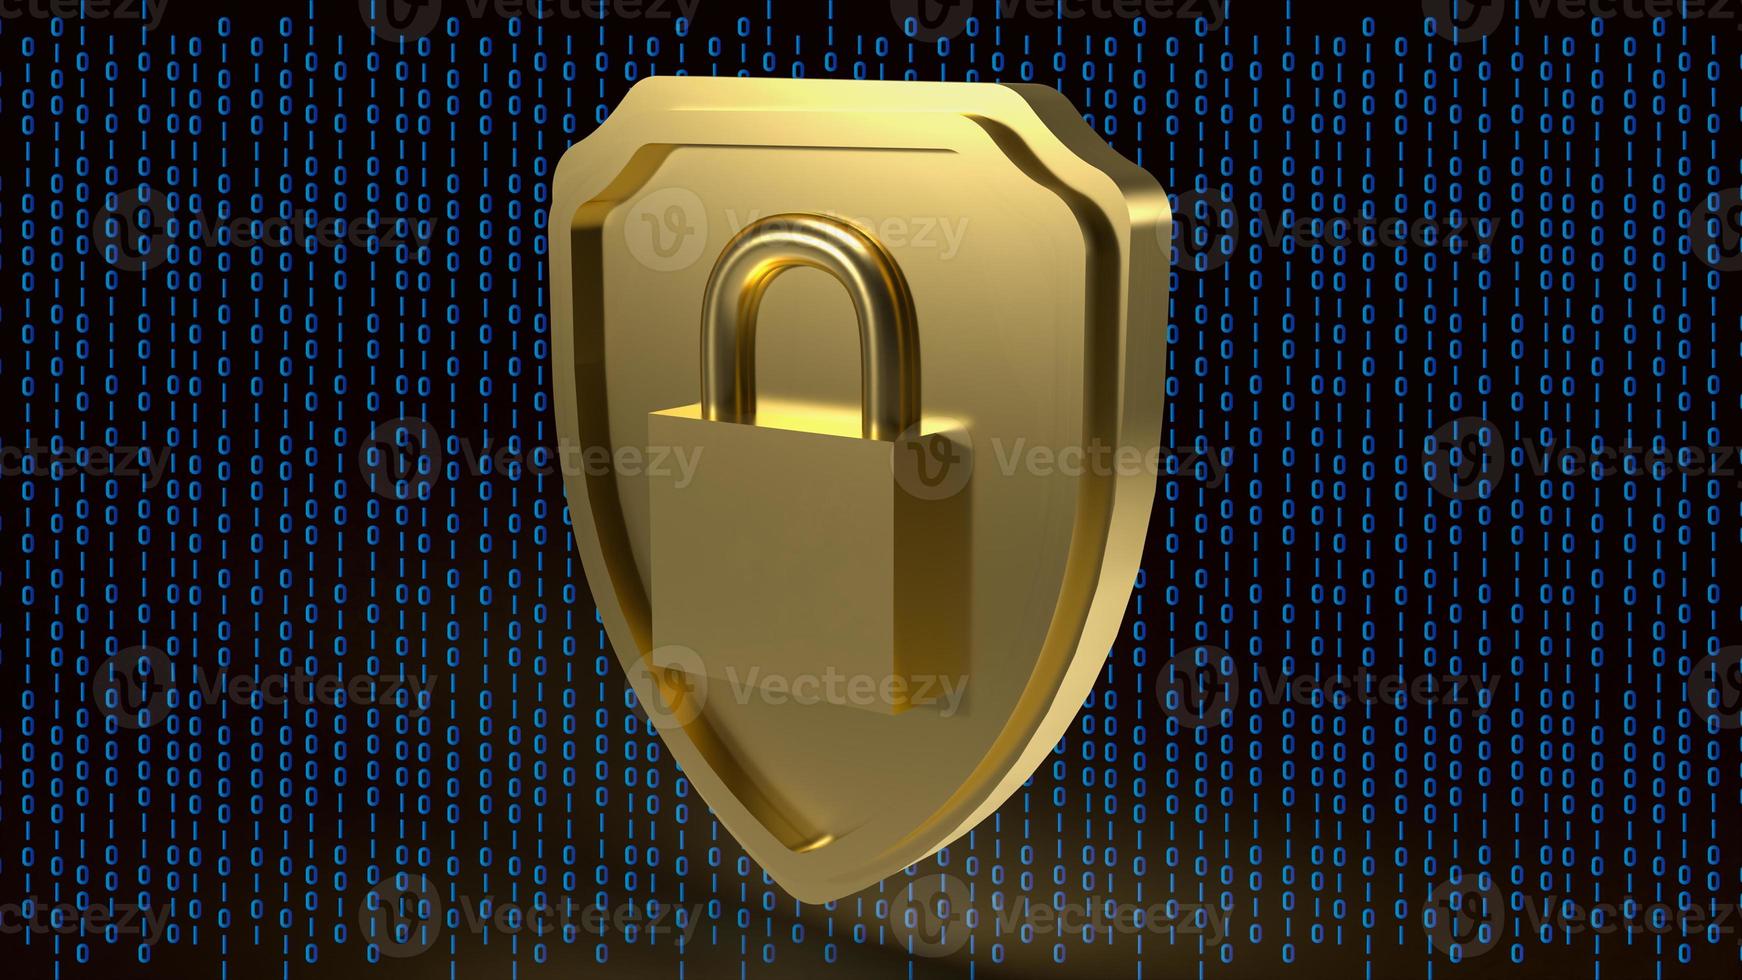 The gold master key on shield on digital background  for security concept 3d rendering photo